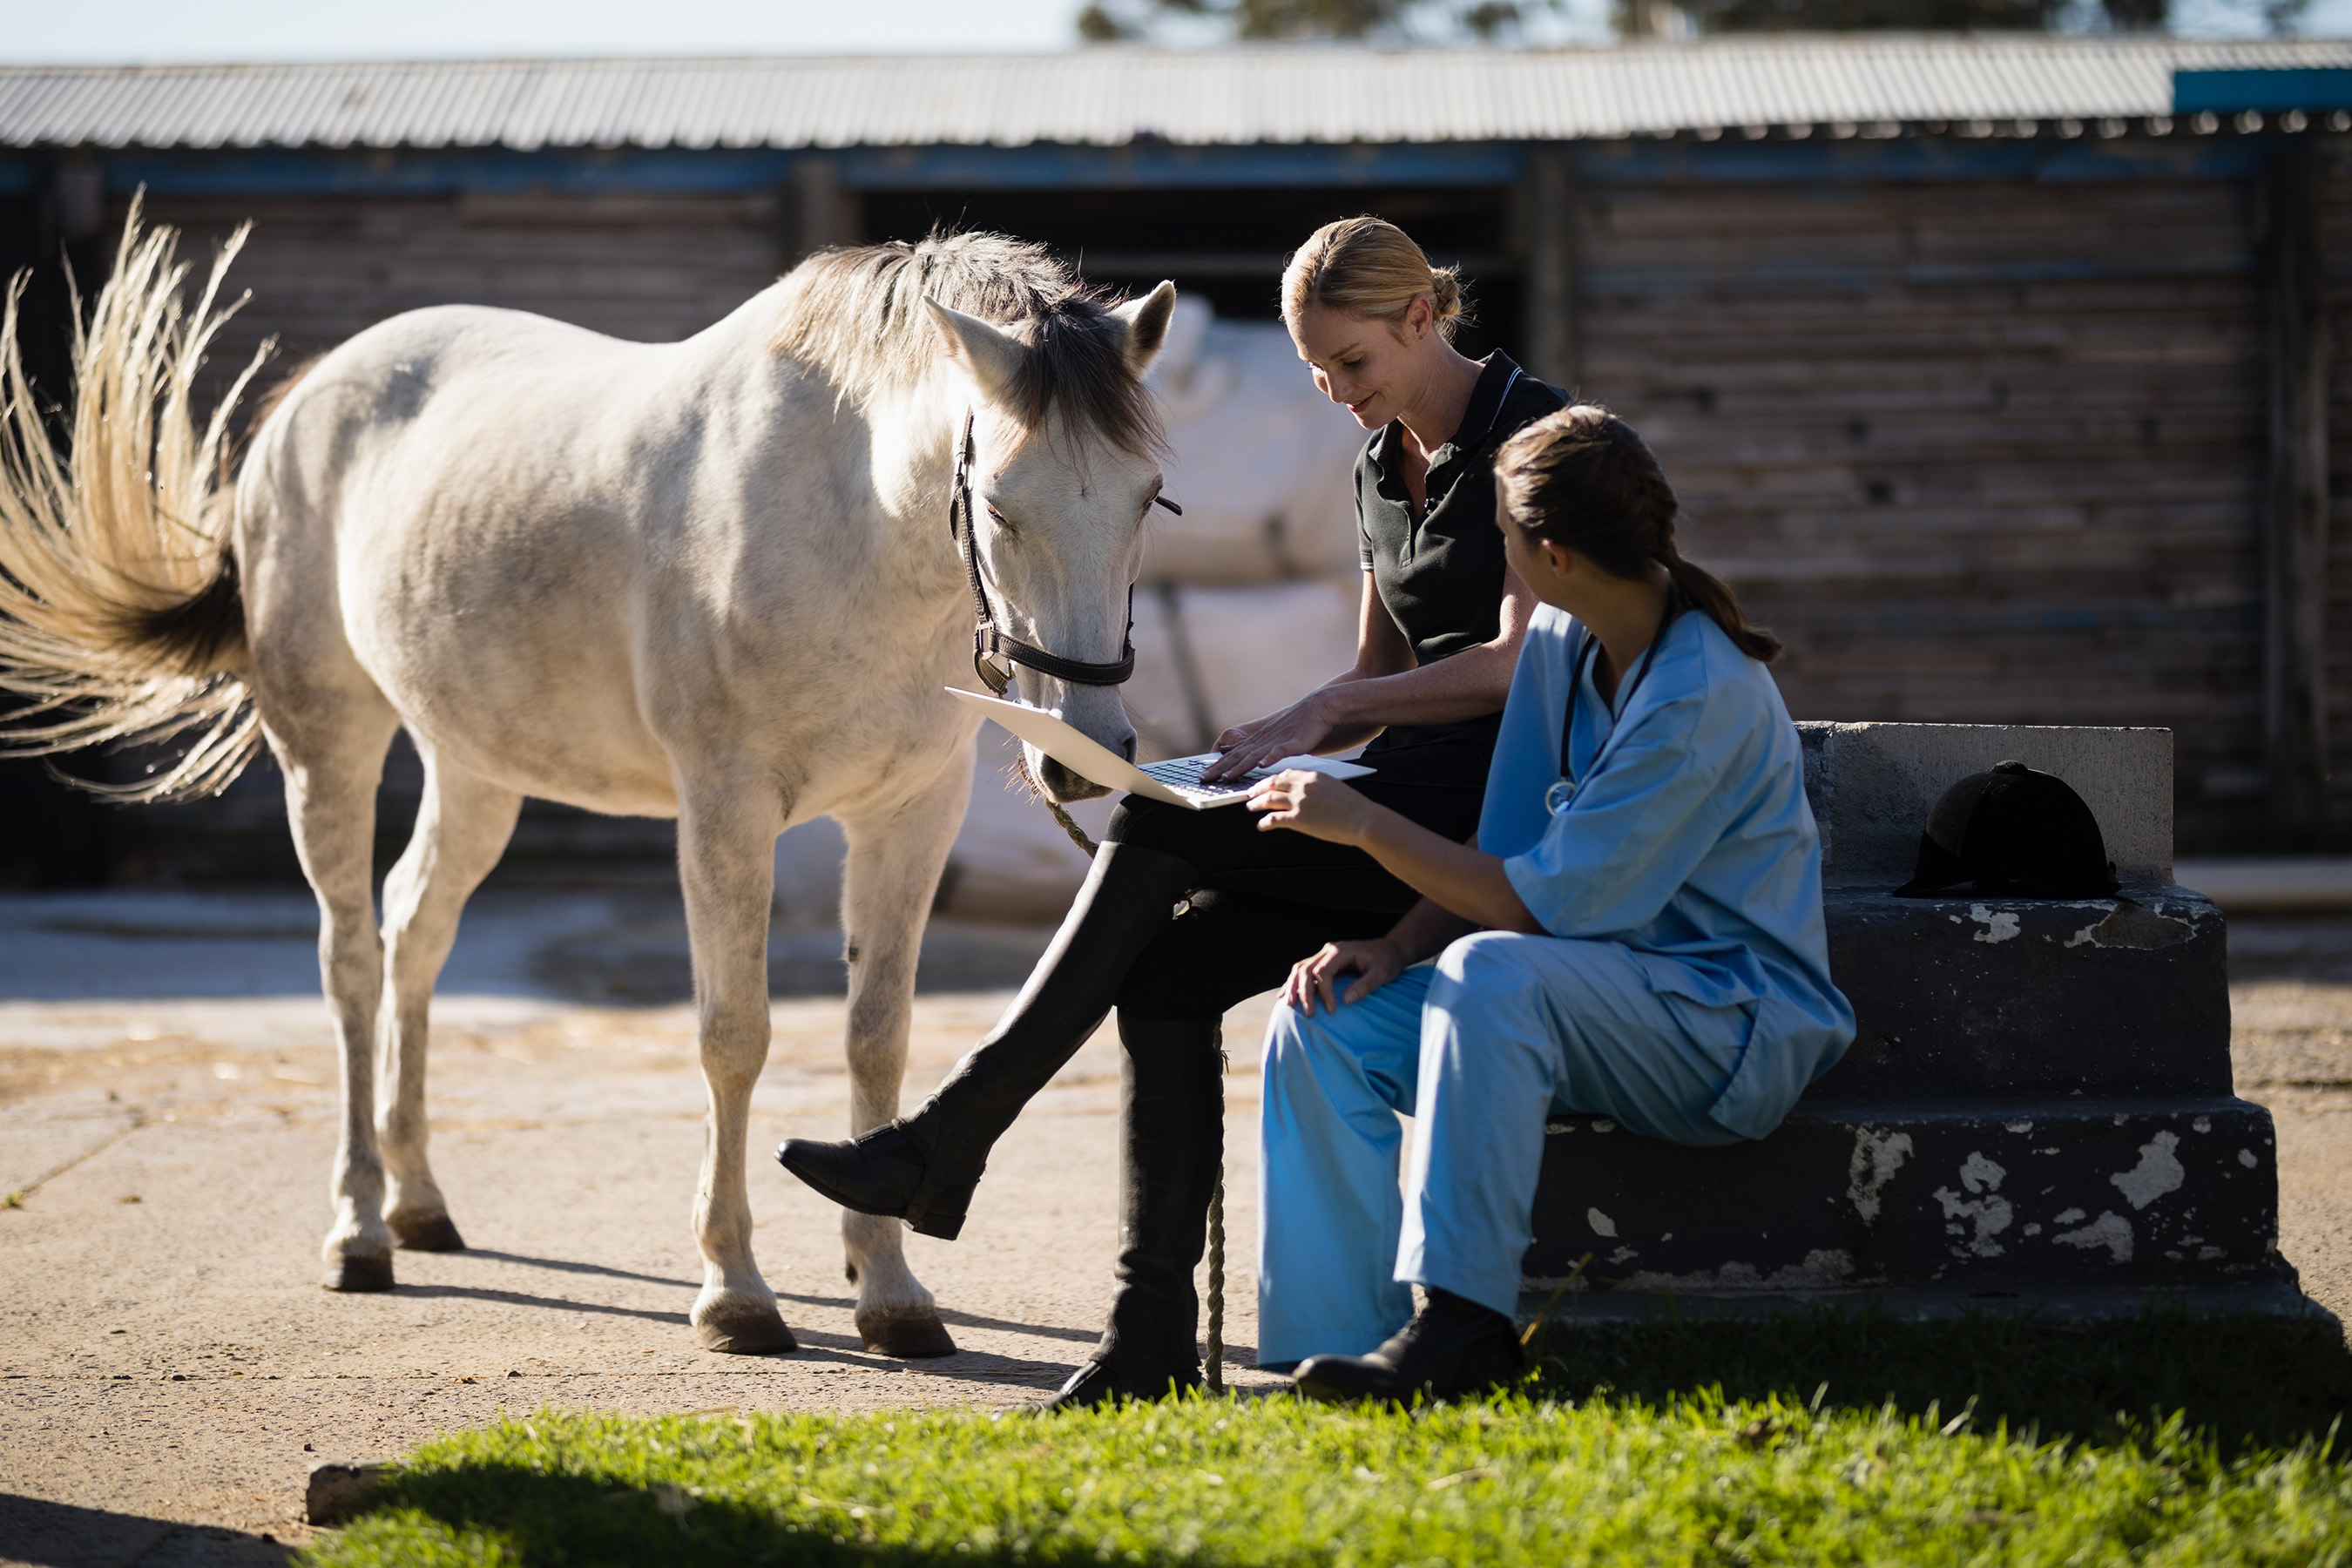 CareCredit’s contactless payment solution brings point-of-care innovation to equine veterinary practices and makes it easier for veterinarians to collect payment for services from any location.